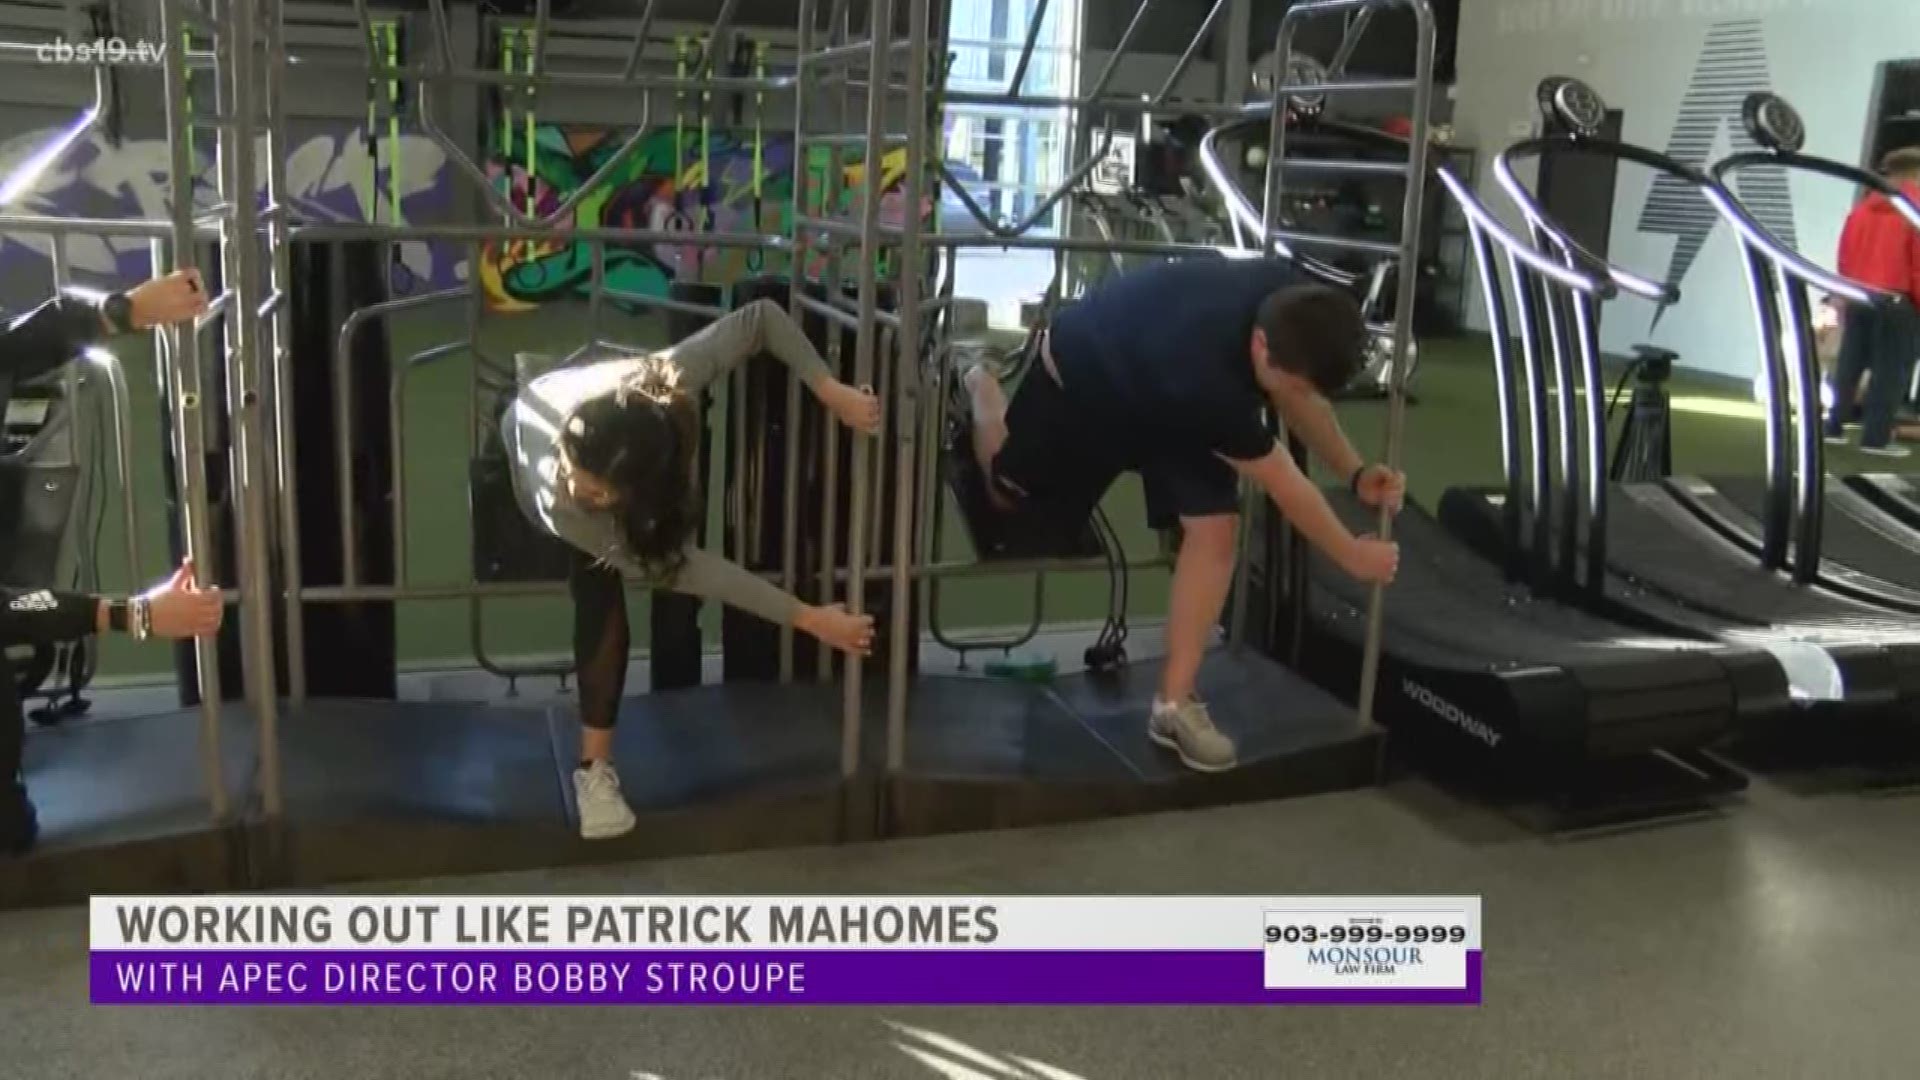 APEC CEO and founder Bobby Stroupe showed CBS19 just a taste of what it takes to make a Mahomes!